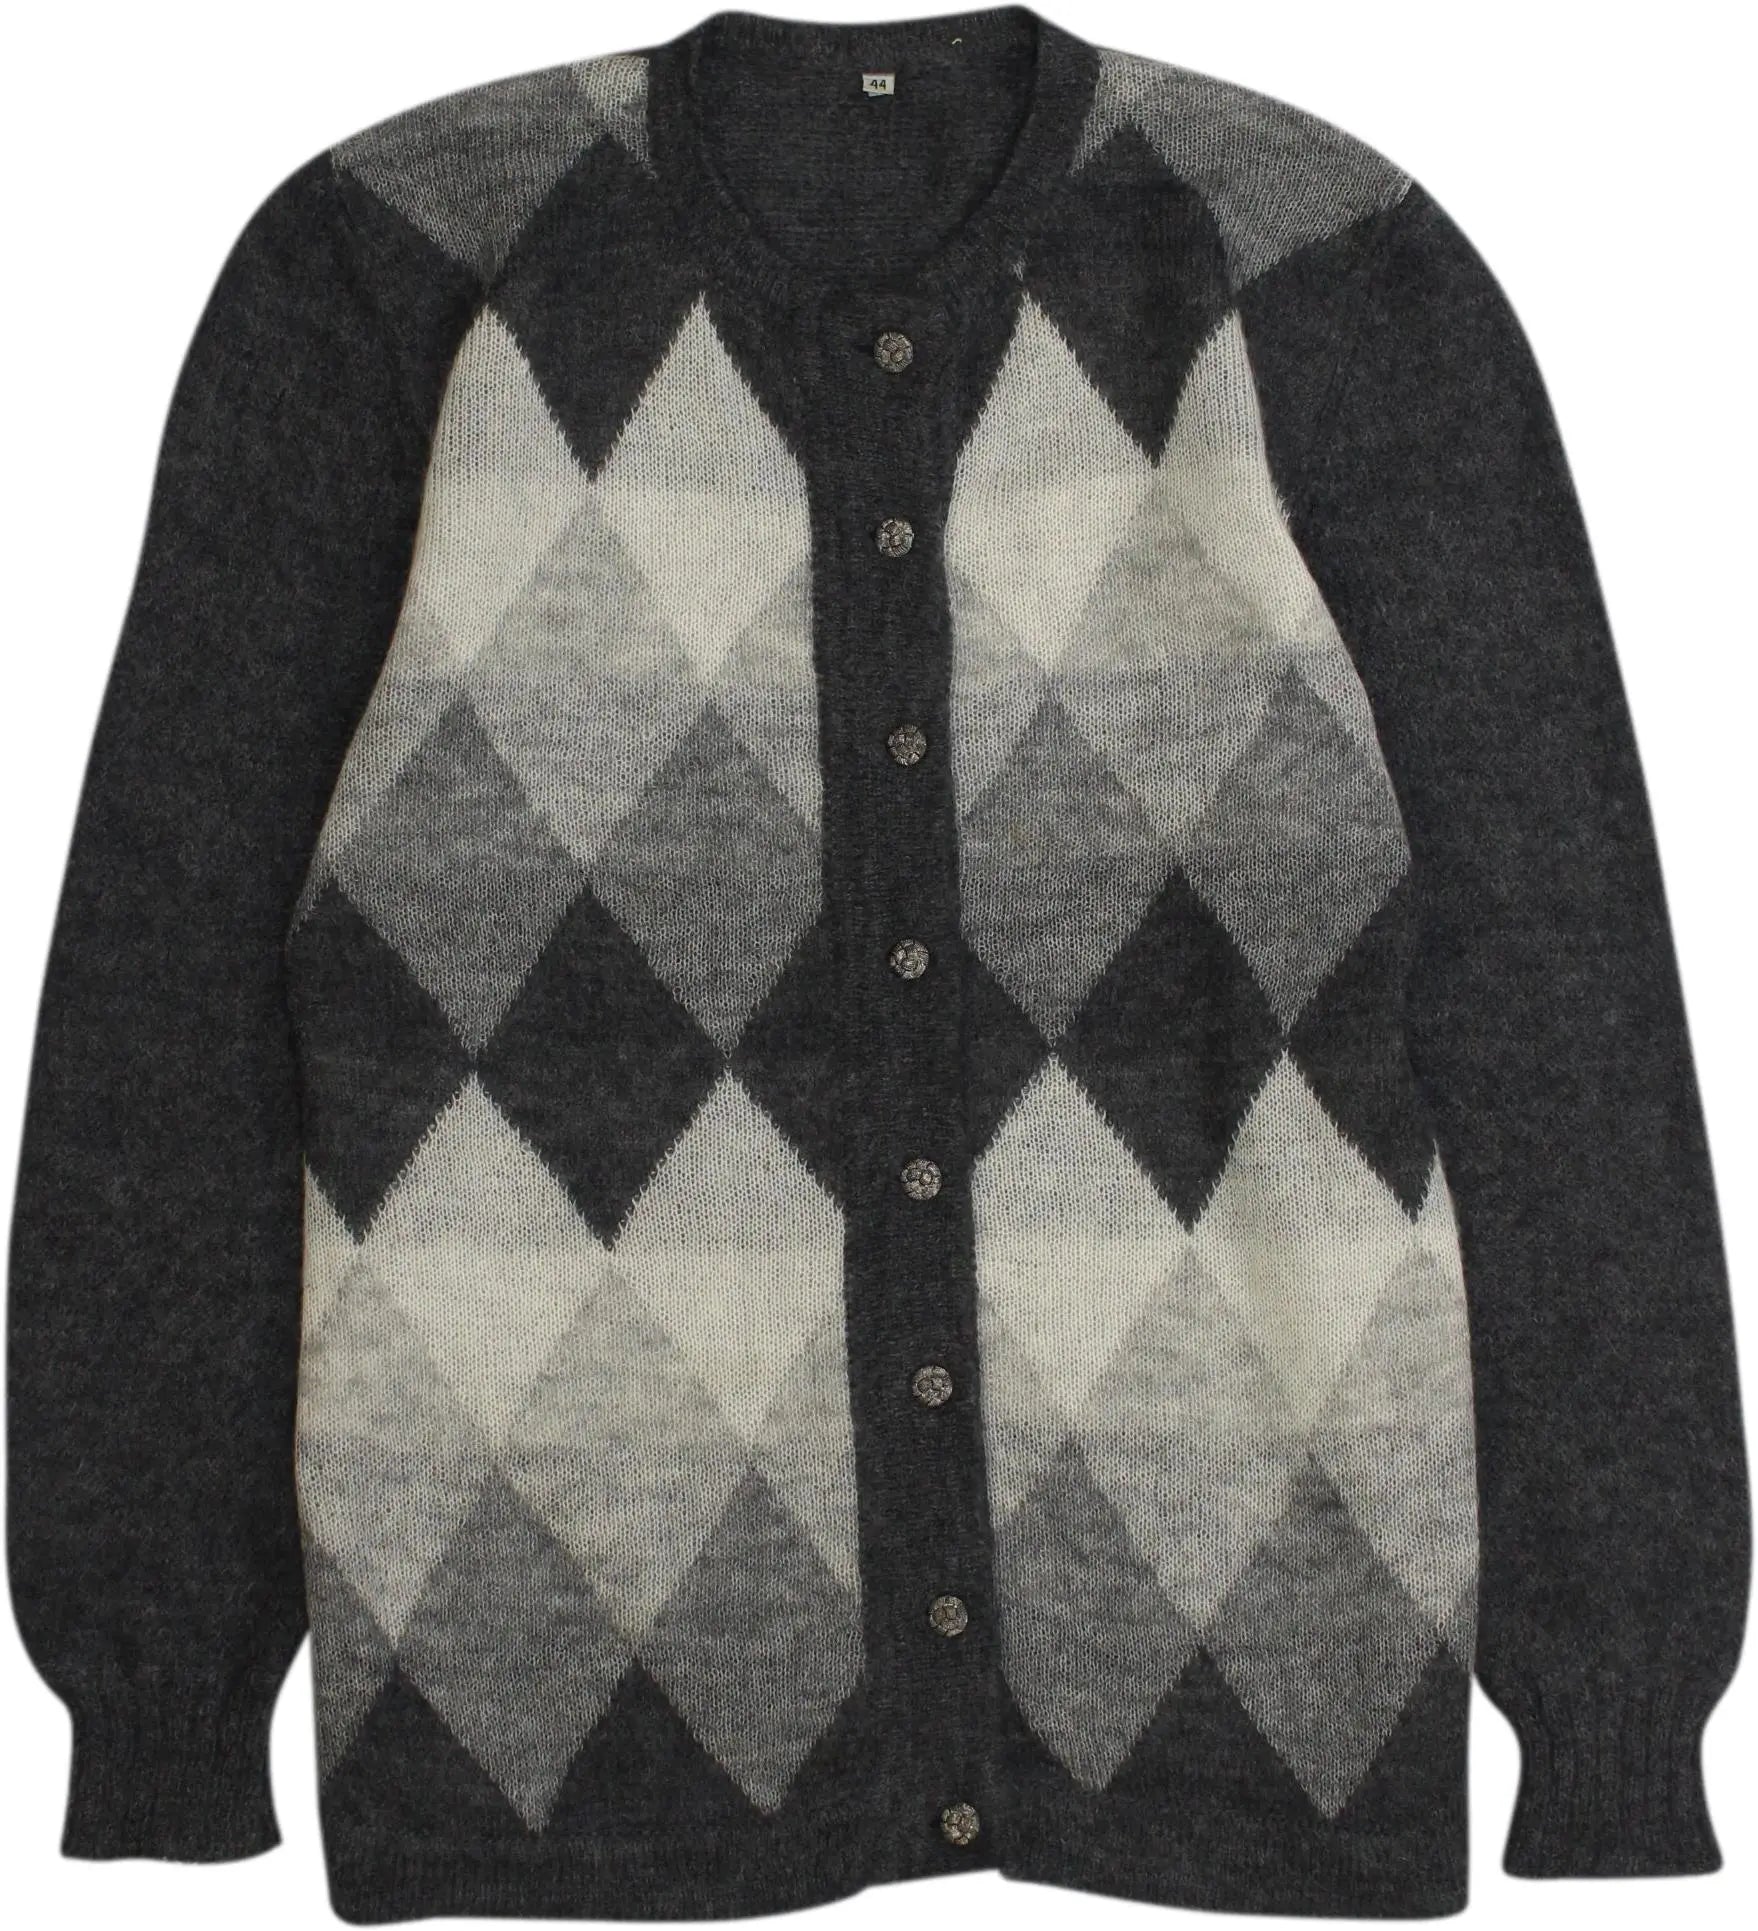 Unknown - Wool Blend Argyle Jumper- ThriftTale.com - Vintage and second handclothing